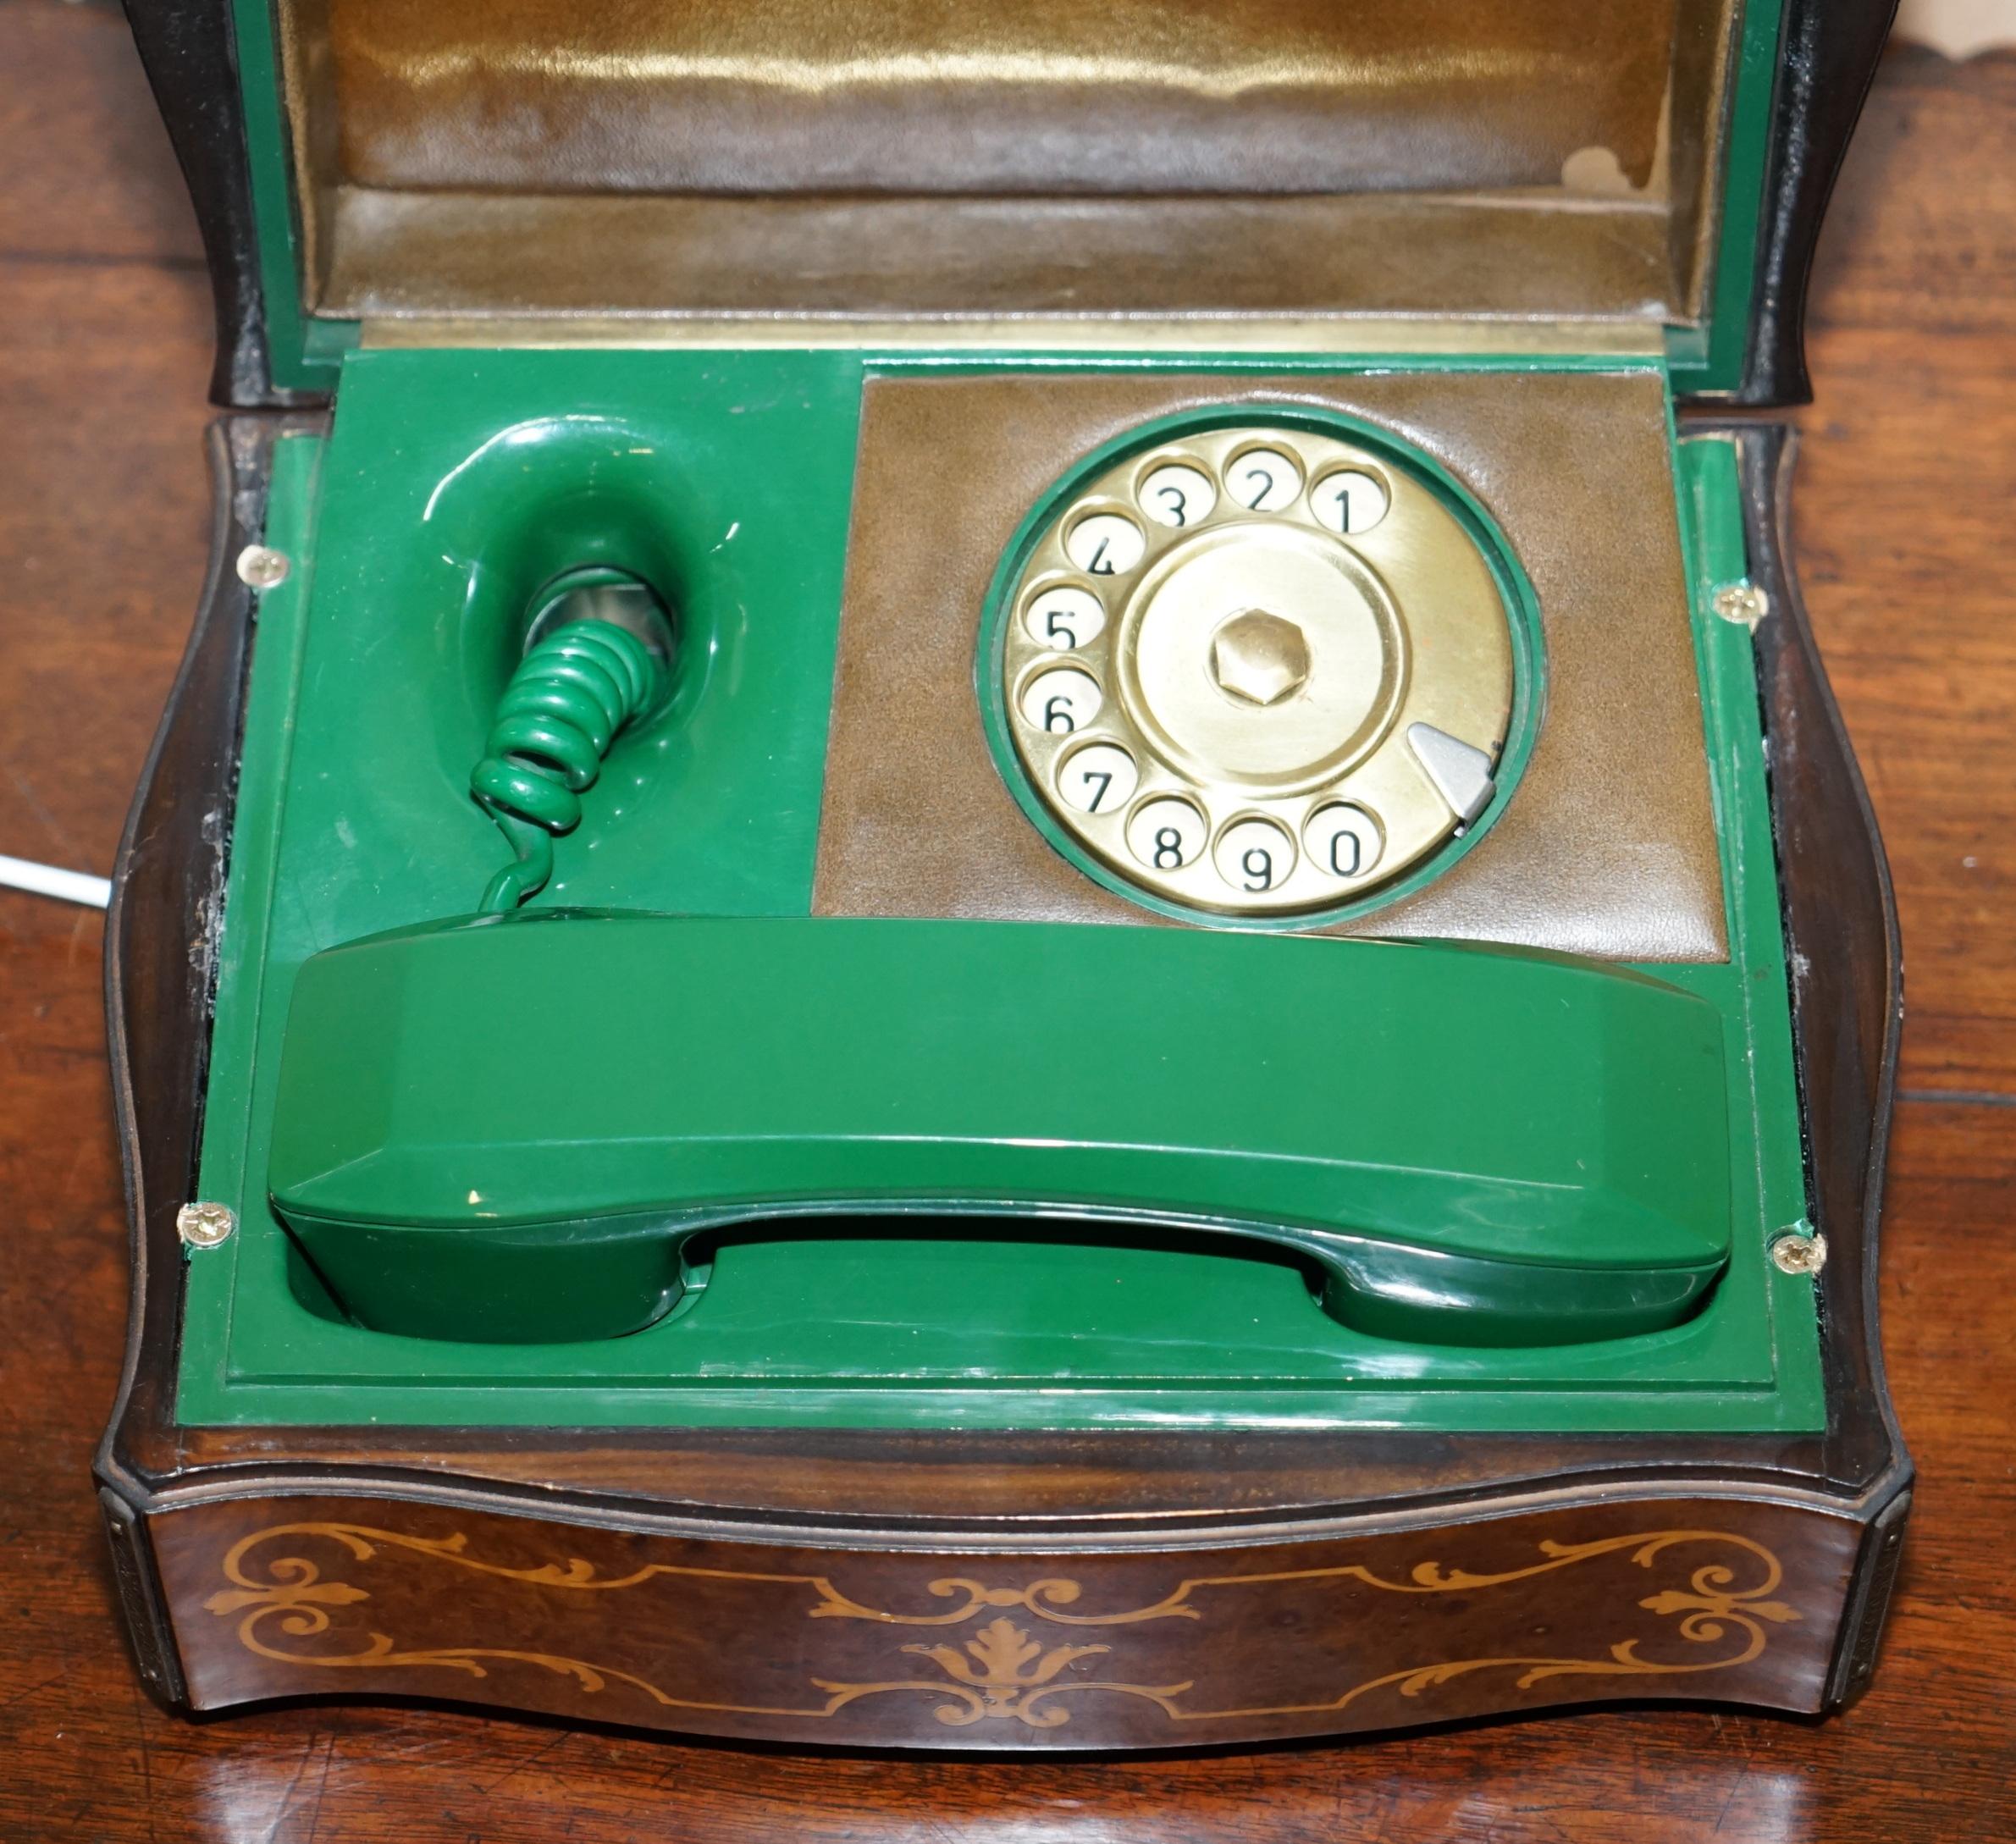 Vintage Green 1950s Telephone Inside Burr Walnut Marquetry Inlaid Box Rare Find 7